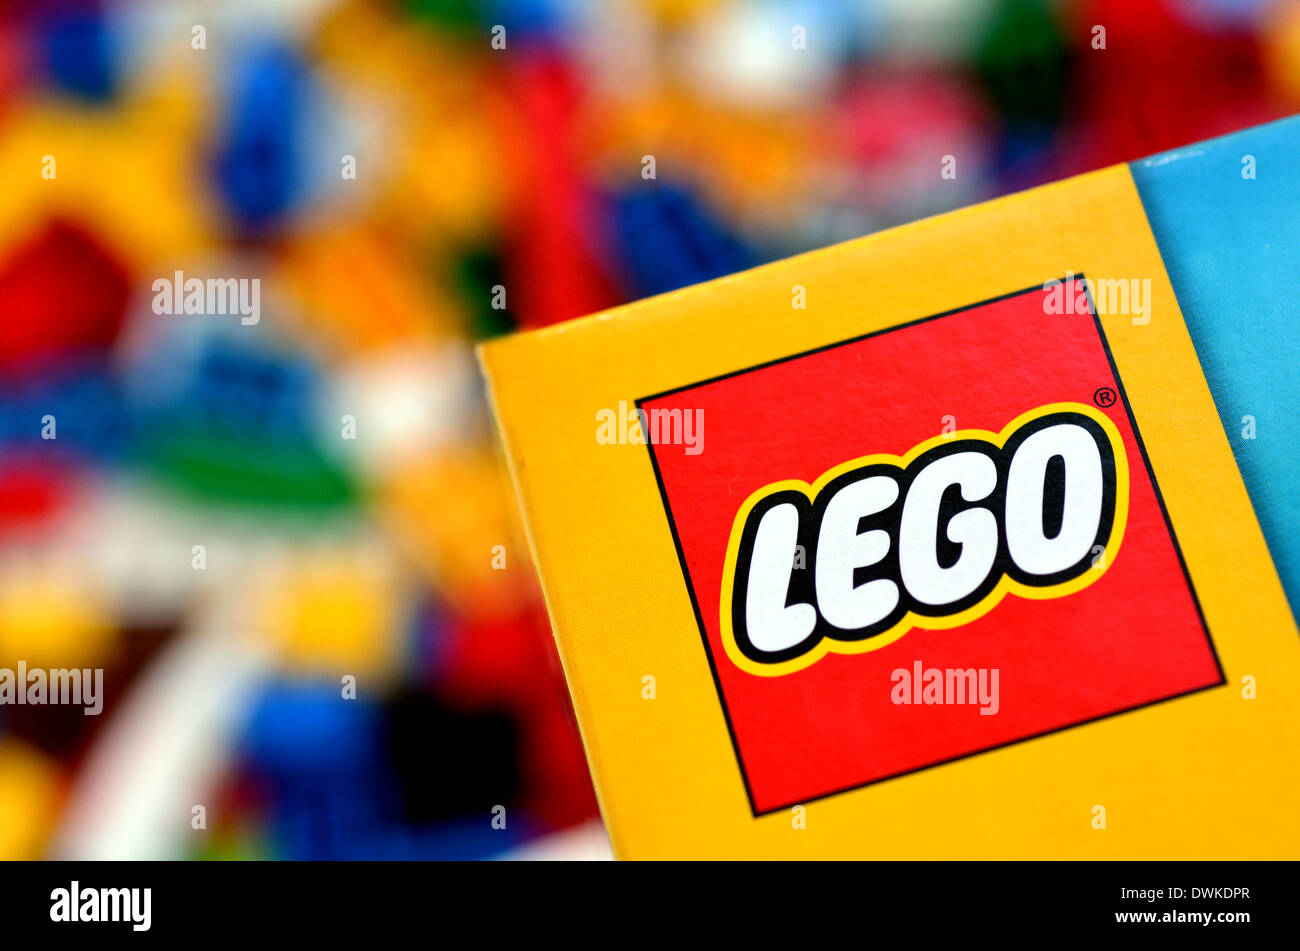 Illustrative Editorial Lego Logo Against A Mix Of Colorful Building Blocks Stock Photo Alamy